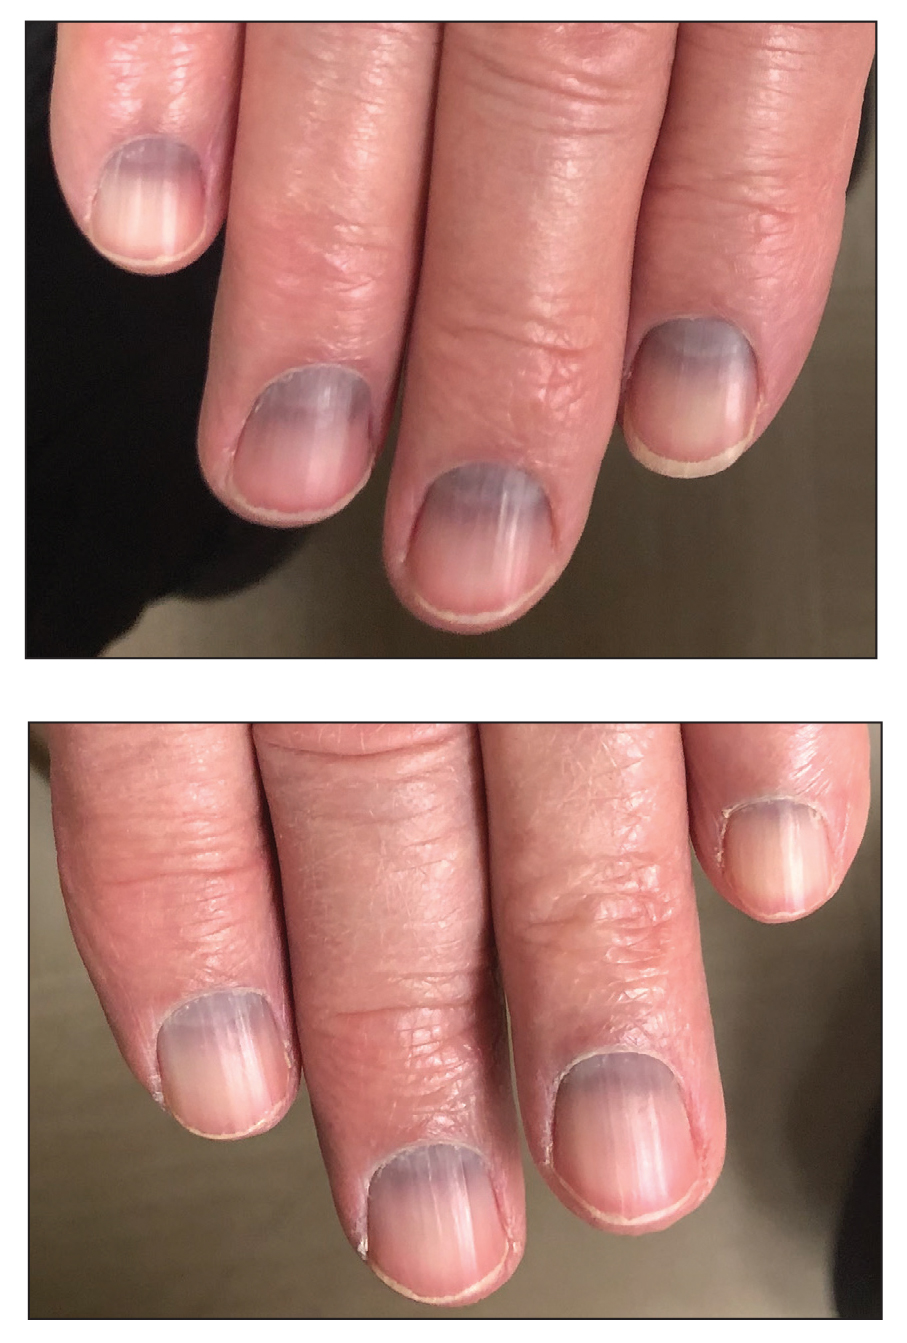 Hair, nail, and pigment changes in major systemic disease. | Semantic  Scholar